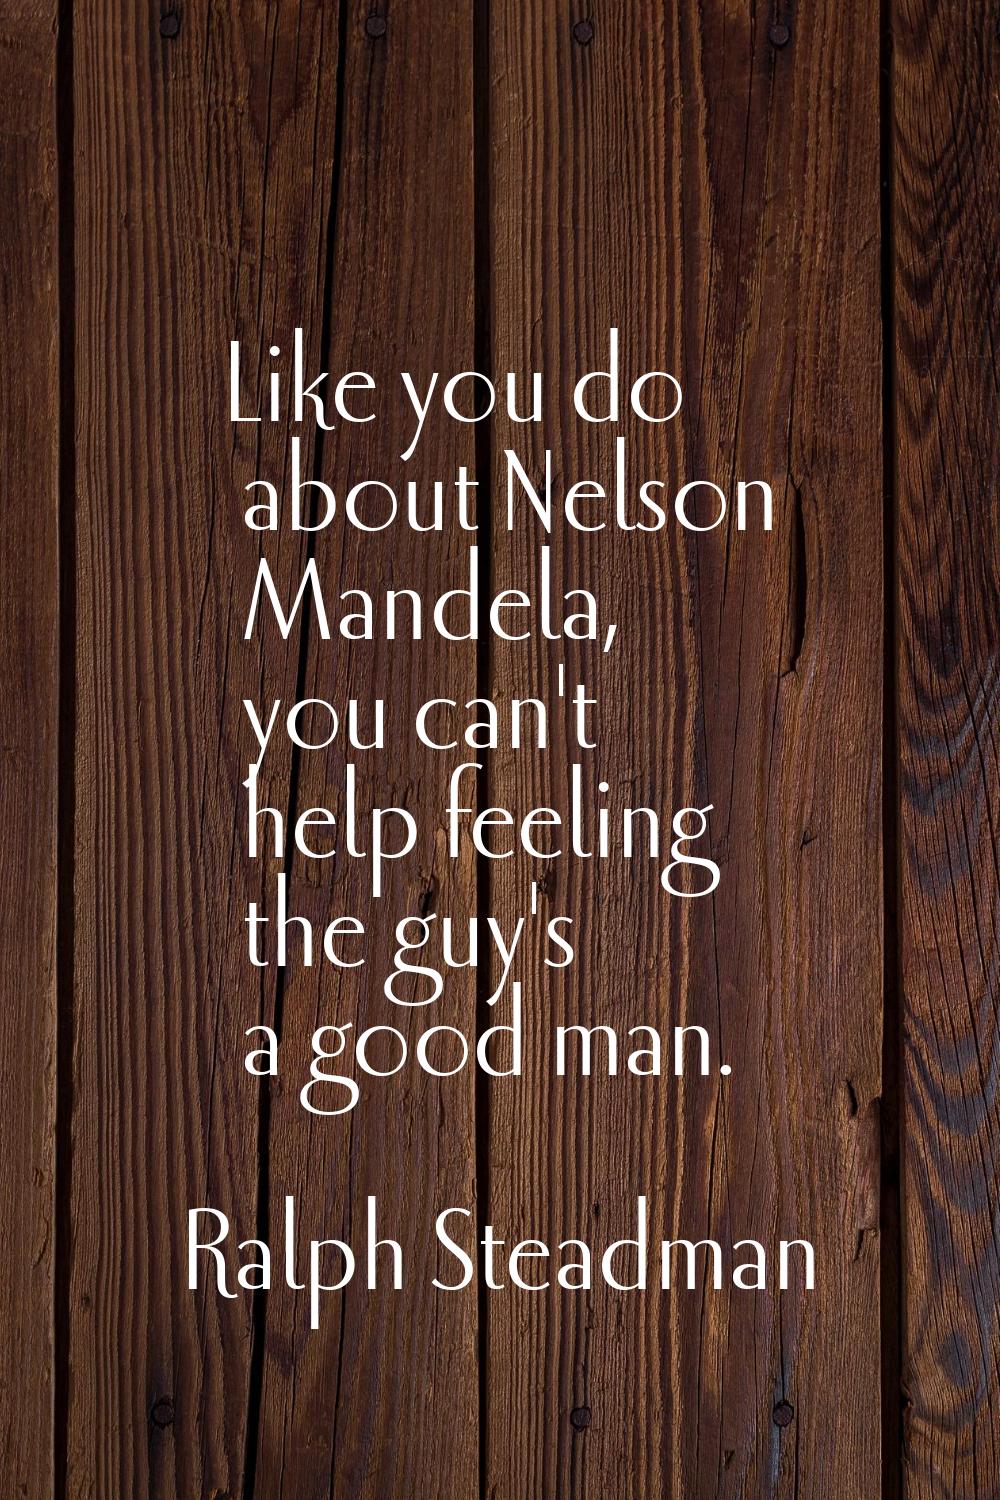 Like you do about Nelson Mandela, you can't help feeling the guy's a good man.